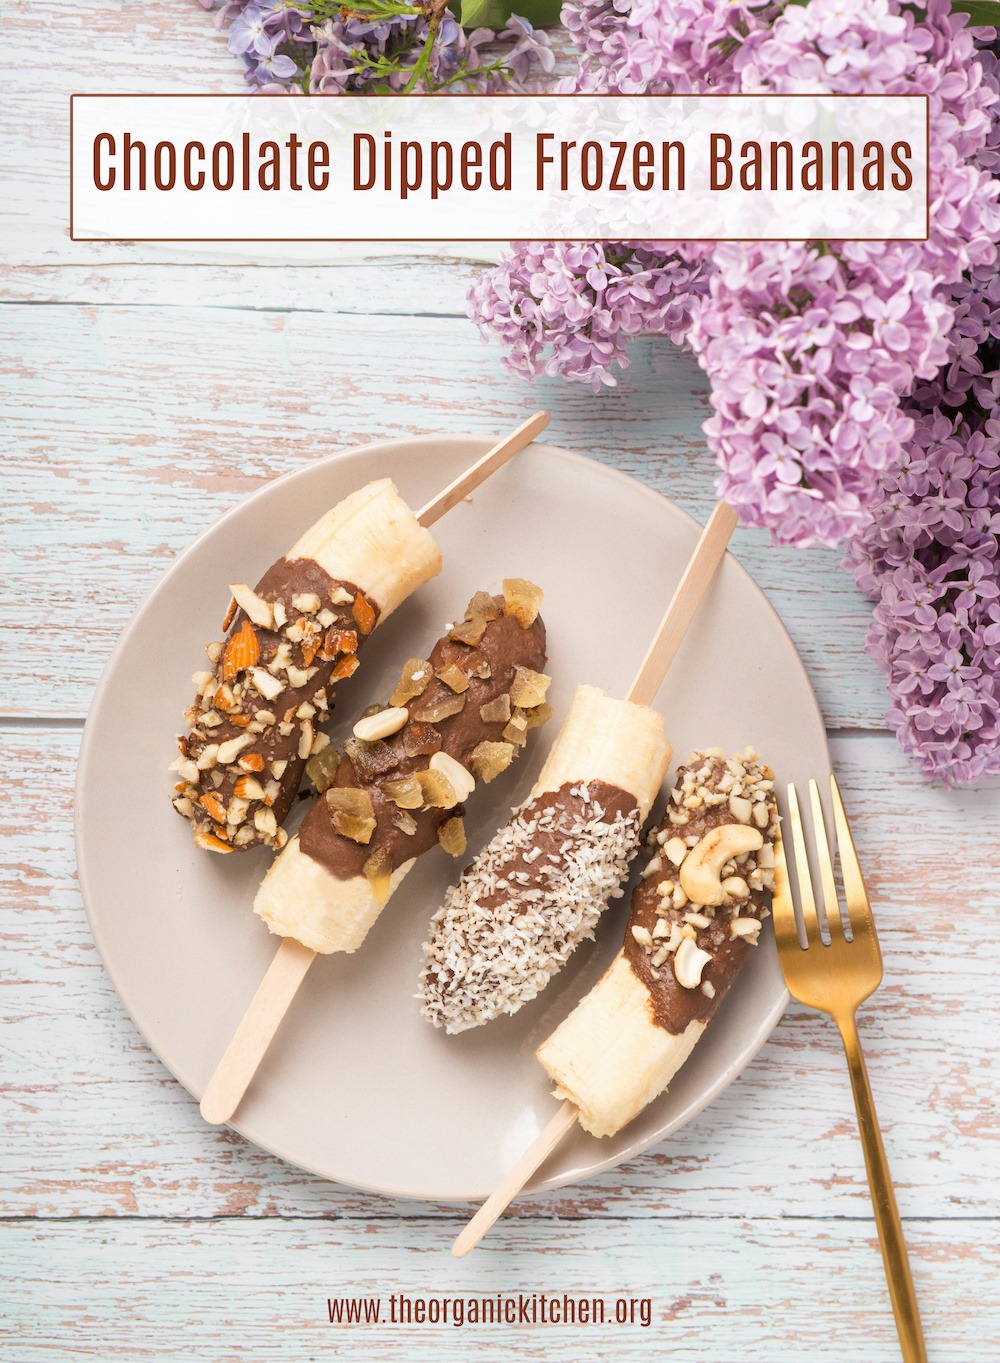 Chocolate Dipped Frozen Bananas surrounded by lilacs on white table